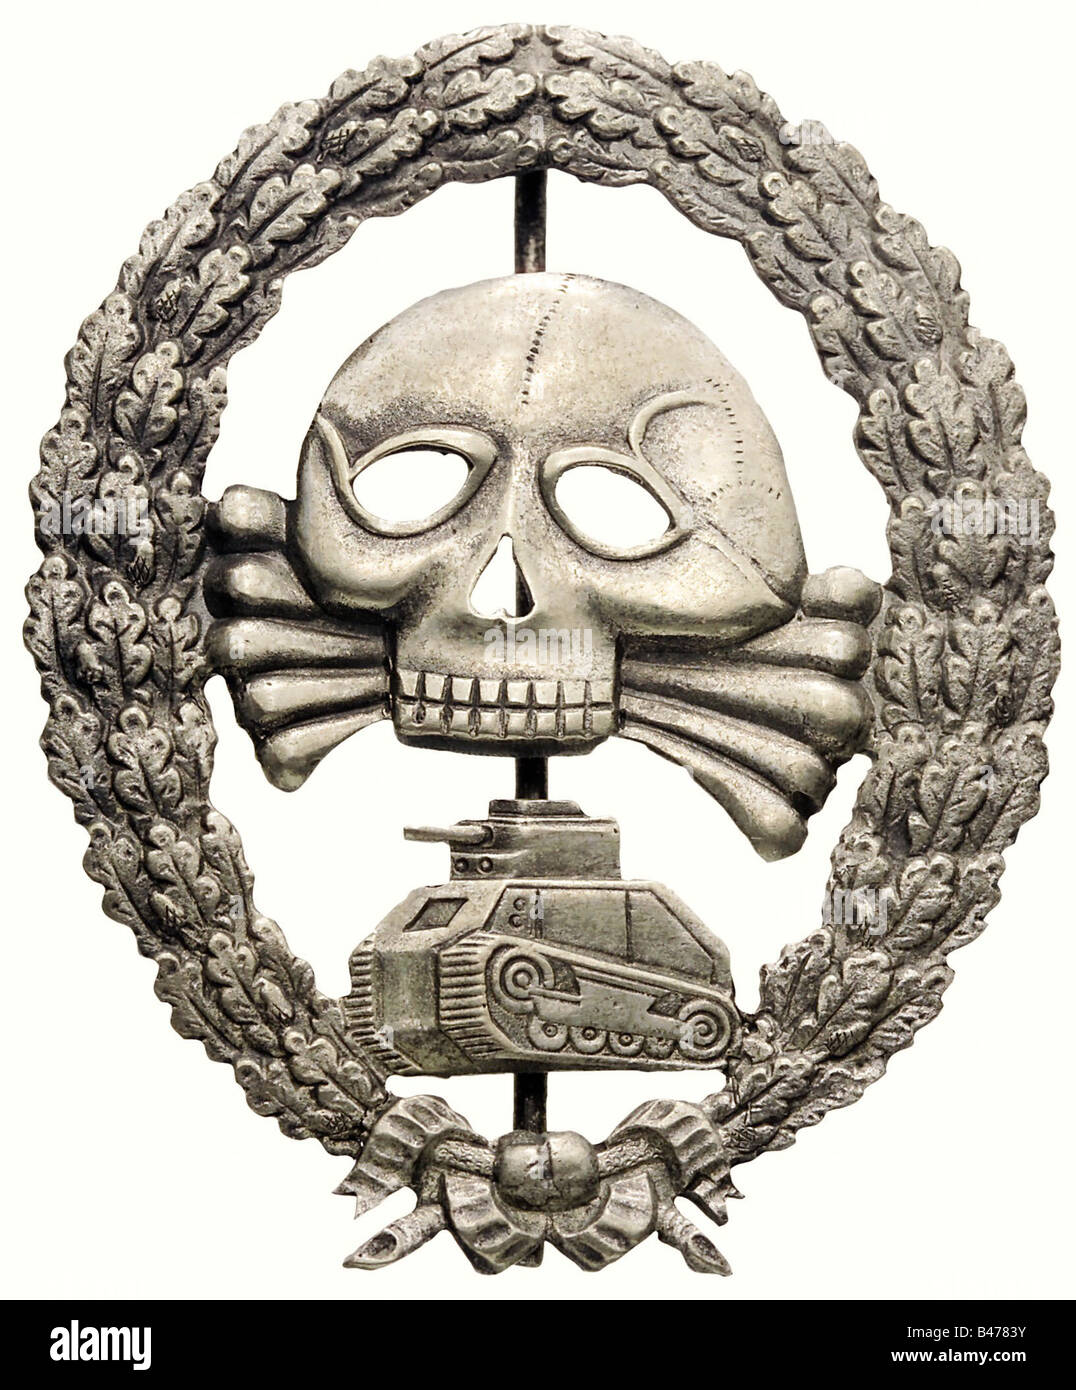 A Tank Badge, of the Legion Condor, 2nd type. Silver plated bronze, hollow stamped, non-magnetic wire pin. Weight 13.5 g. Slightly worn. The wreath is broken next to the bow. Including a photo expertise by Detlev Niemann. historic, historical, 1930s, 1930s, 20th century, awards, award, German Reich, Third Reich, Nazi era, National Socialism, object, objects, stills, medal, decoration, medals, decorations, clipping, cut out, cut-out, cut-outs, honor, honour, National Socialist, Nazi, Nazi period, symbol, symbols, emblem, emblems, insignia, Stock Photo